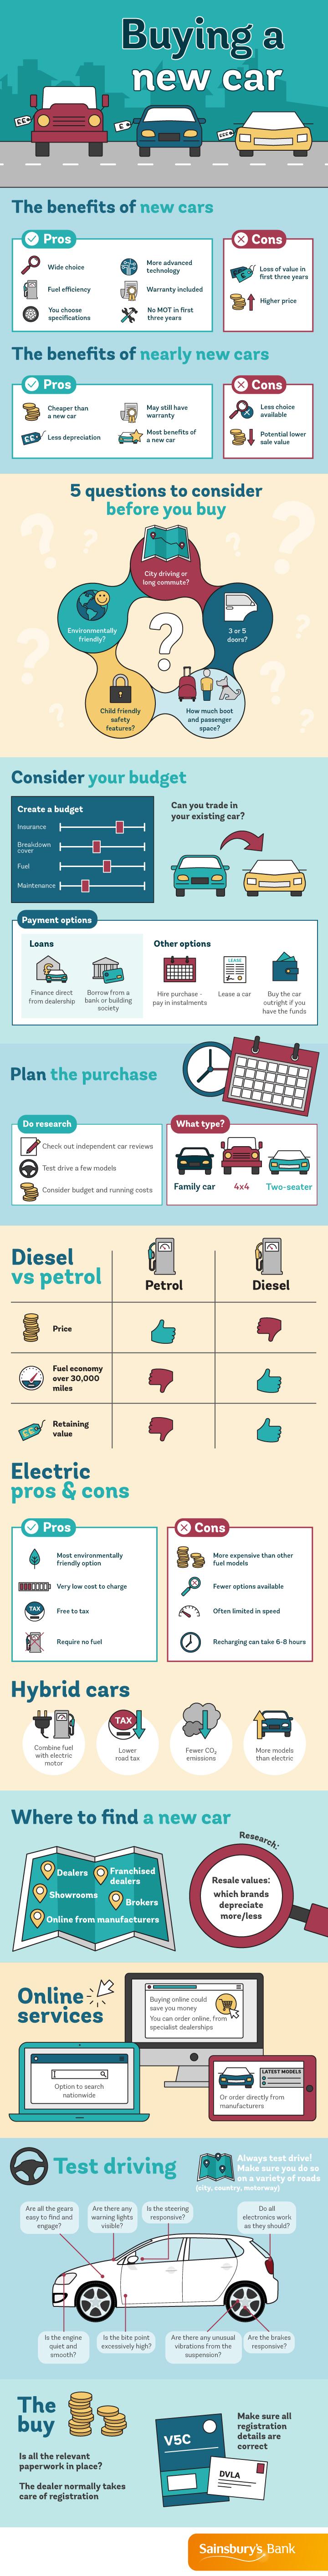 Visual guide to buying a new car